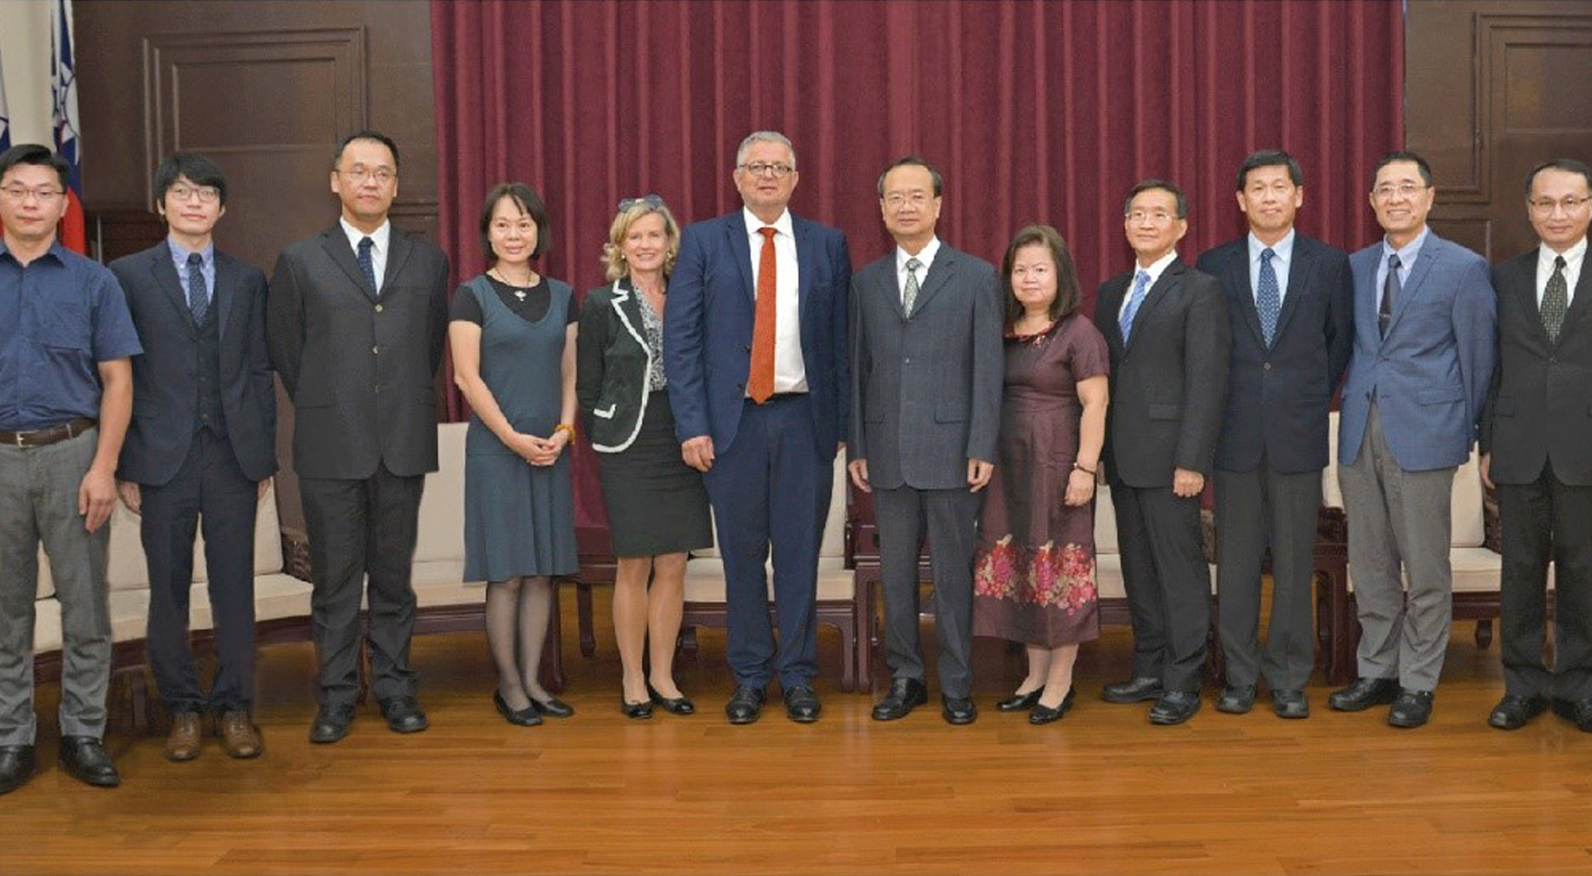 President HSU meeting Justice Prof. Dr. Peter M. Huber (Justice of the Federal Constitutional Court of Germany) and his wife, exchanging views on the practice of the constitutional review